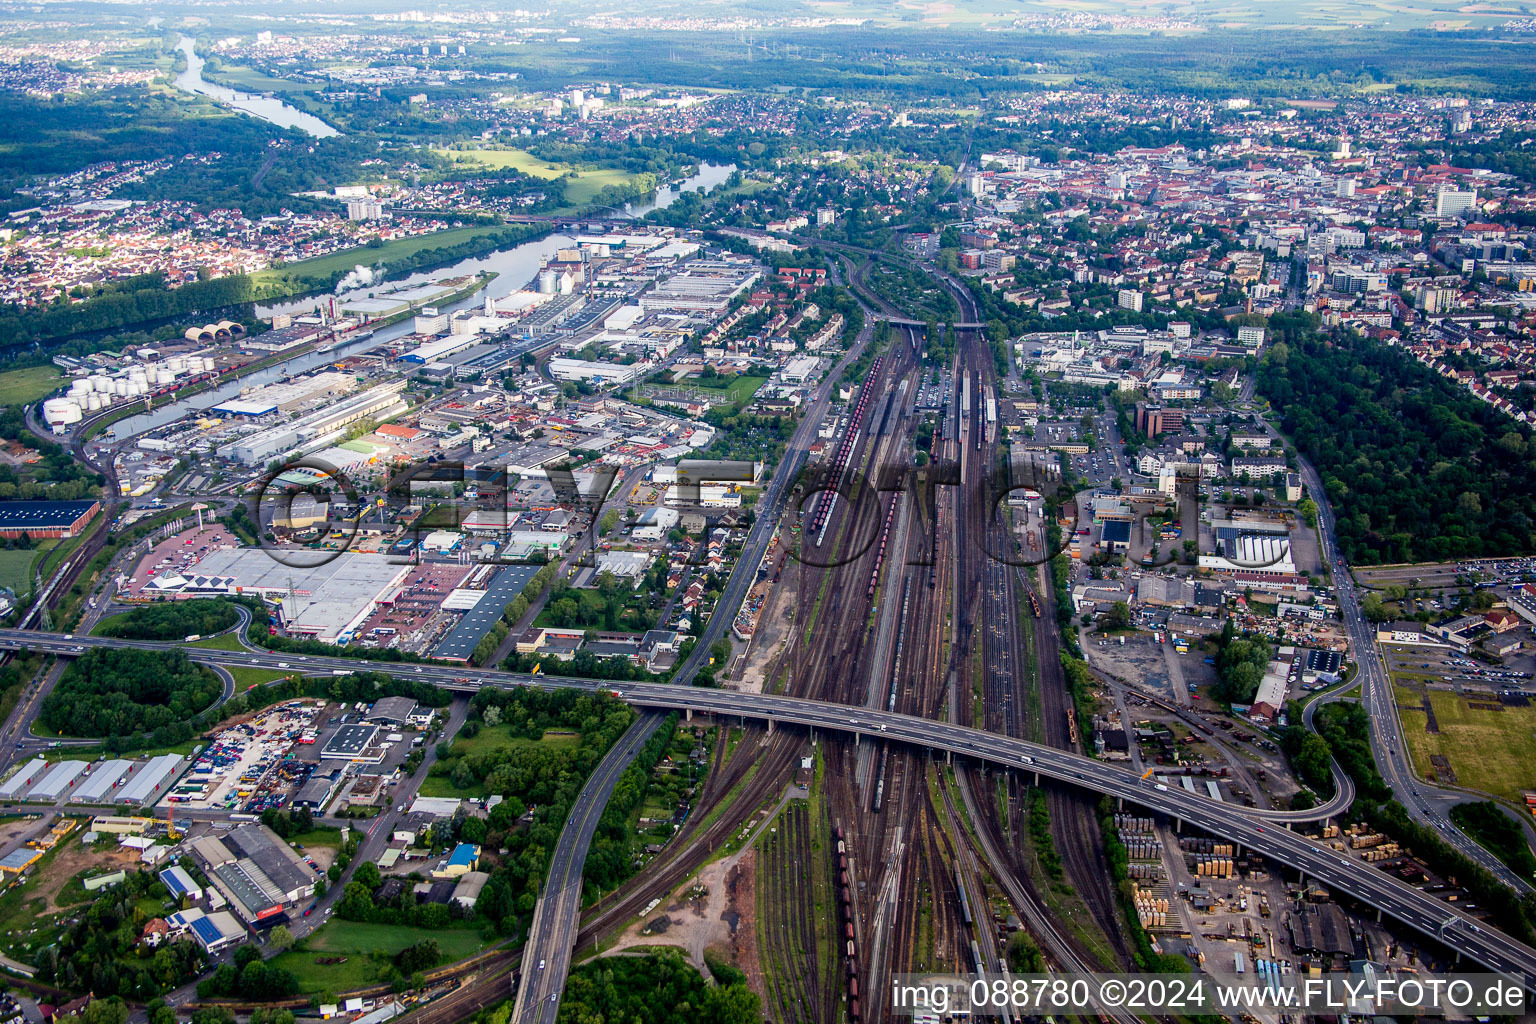 Track progress and building of the main station of the railway in Hanau in the state Hesse, Germany